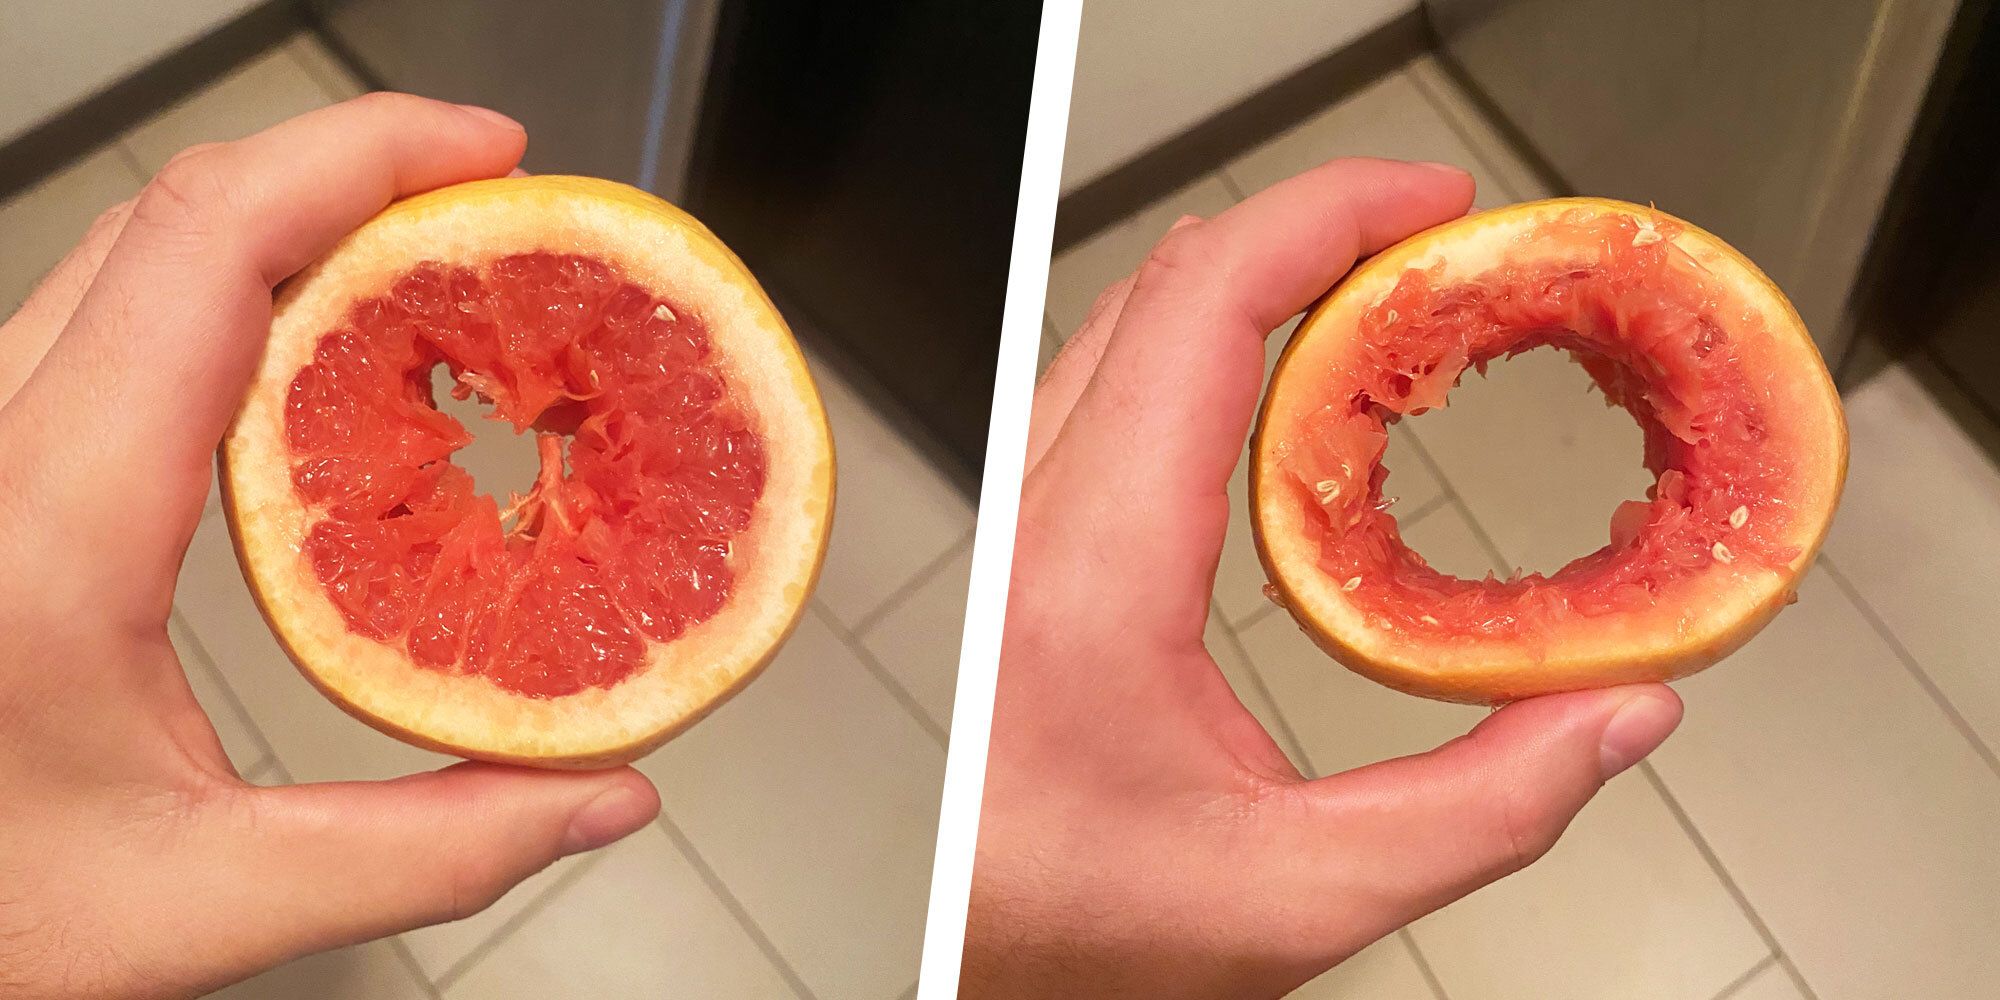 How To Suck Dick With A Grapefruit